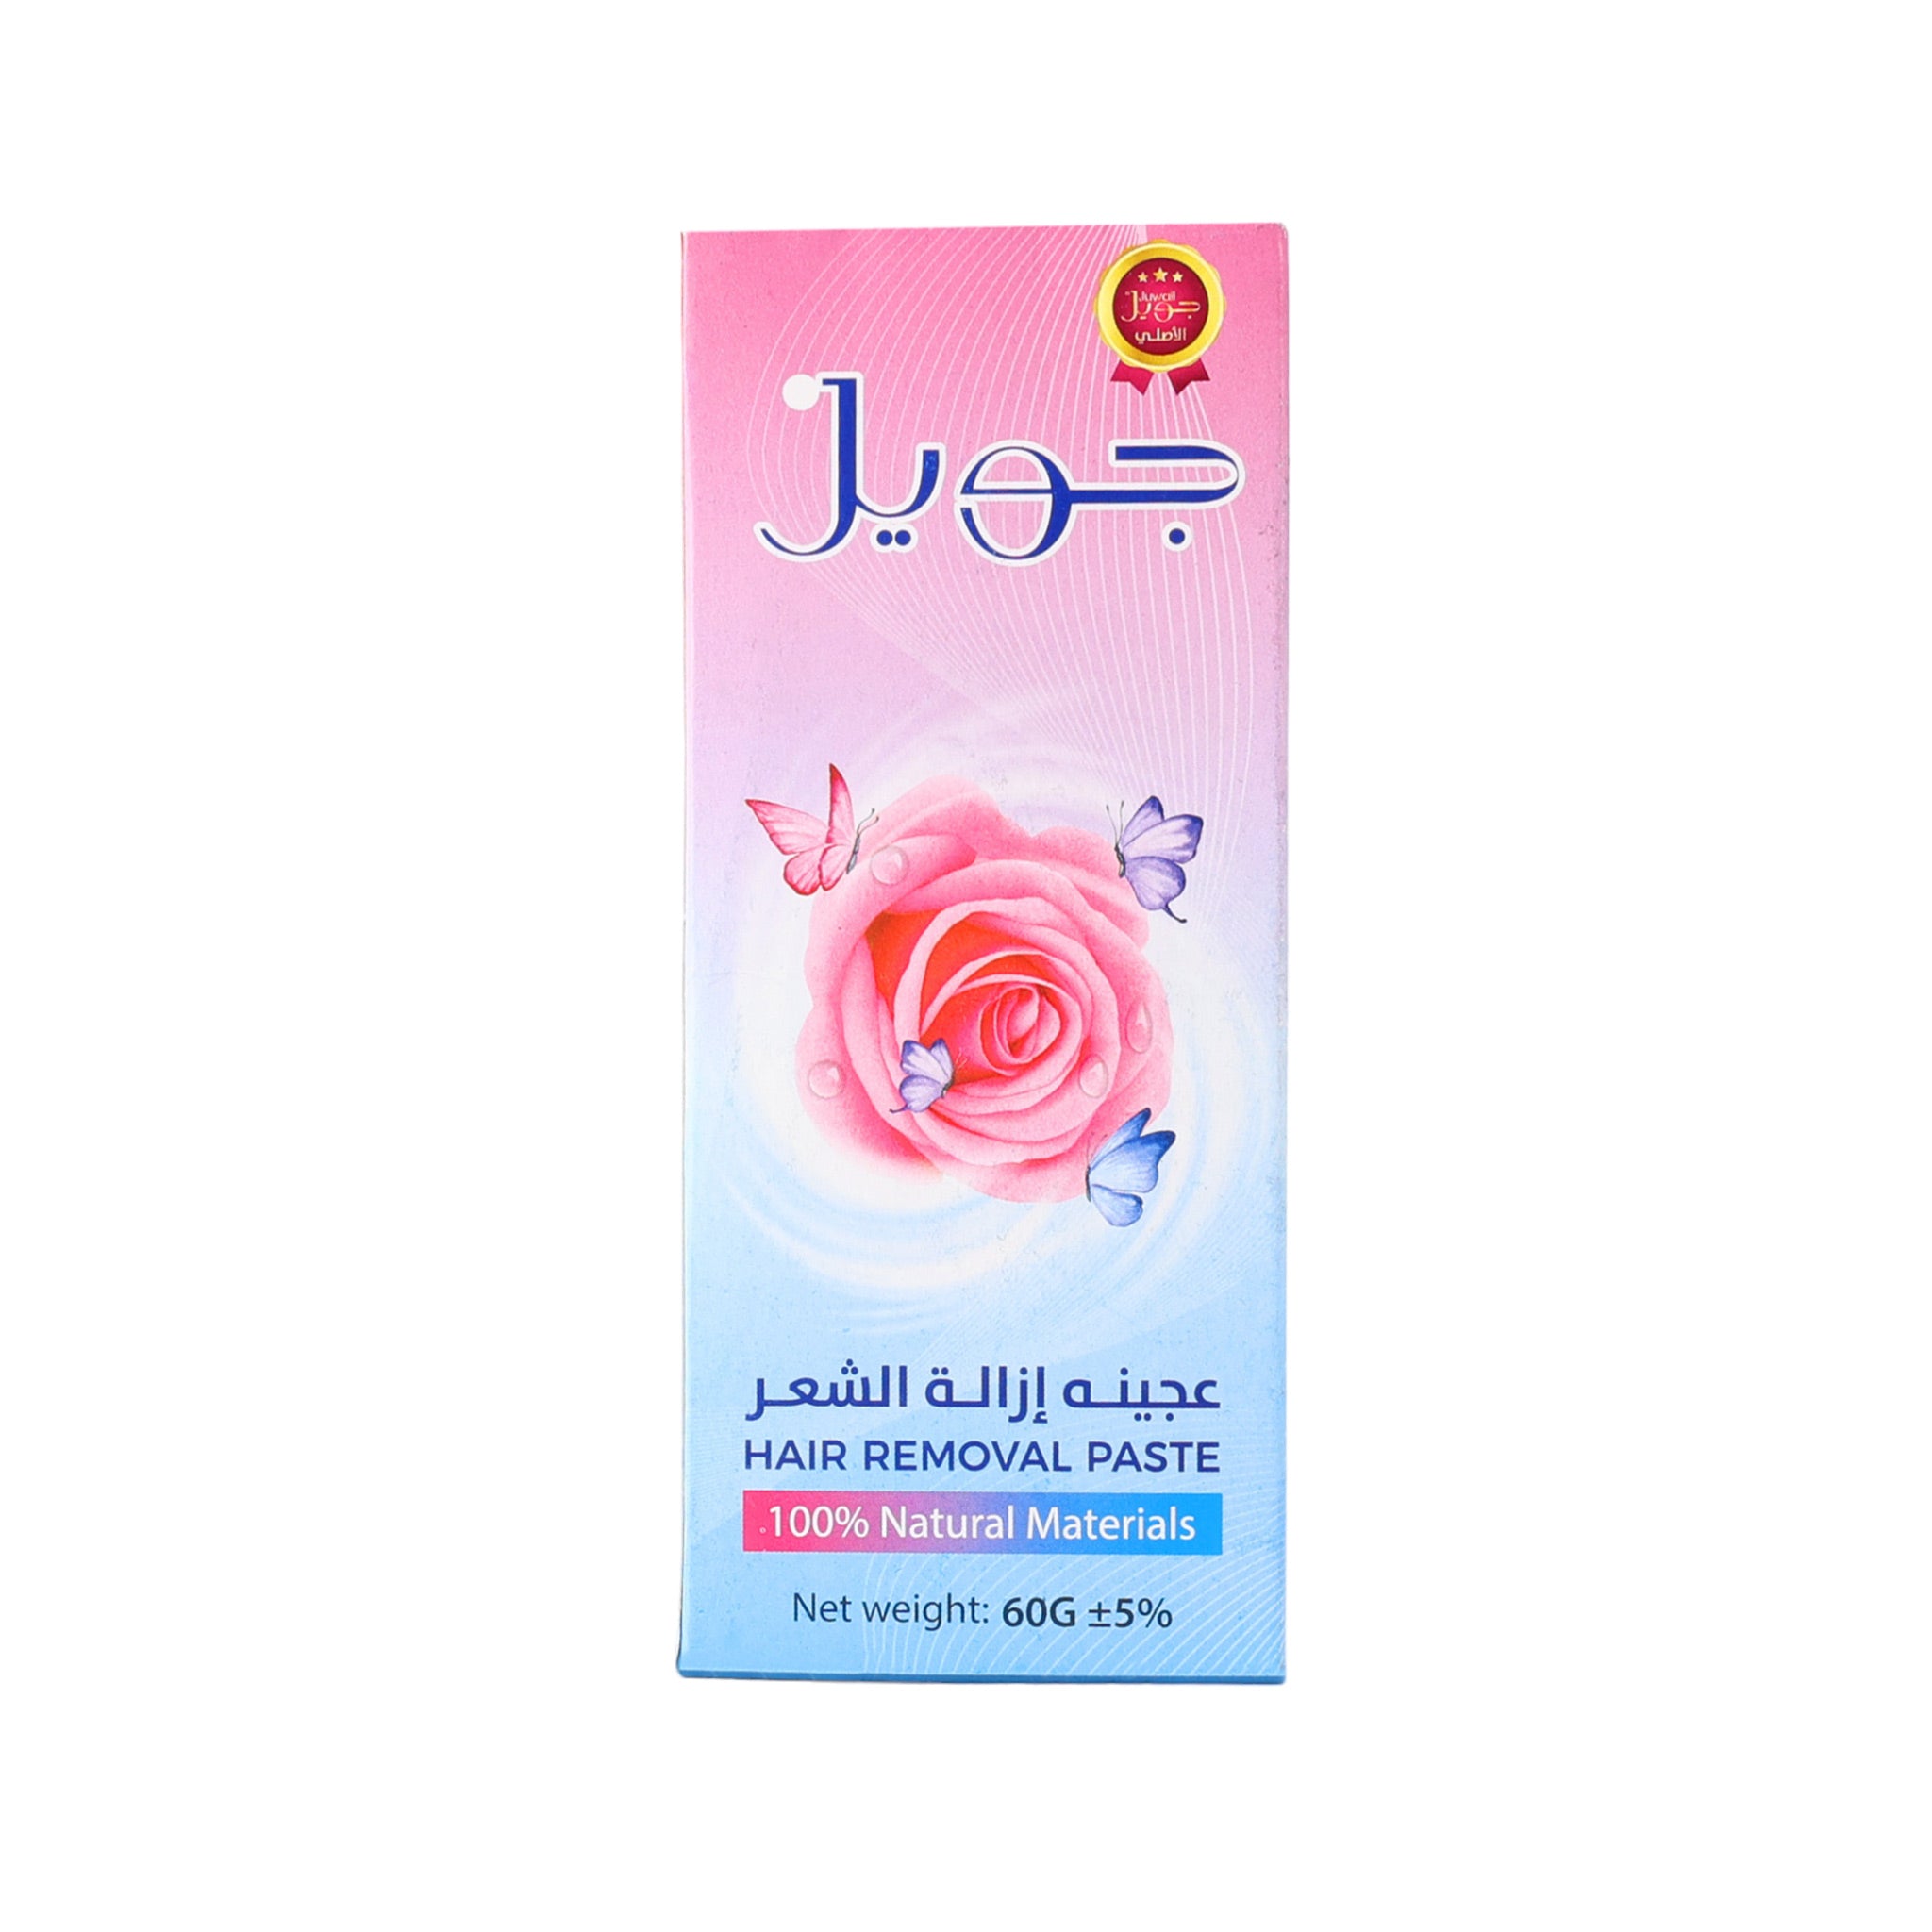 Juwaill Hair Removal Paste 60g